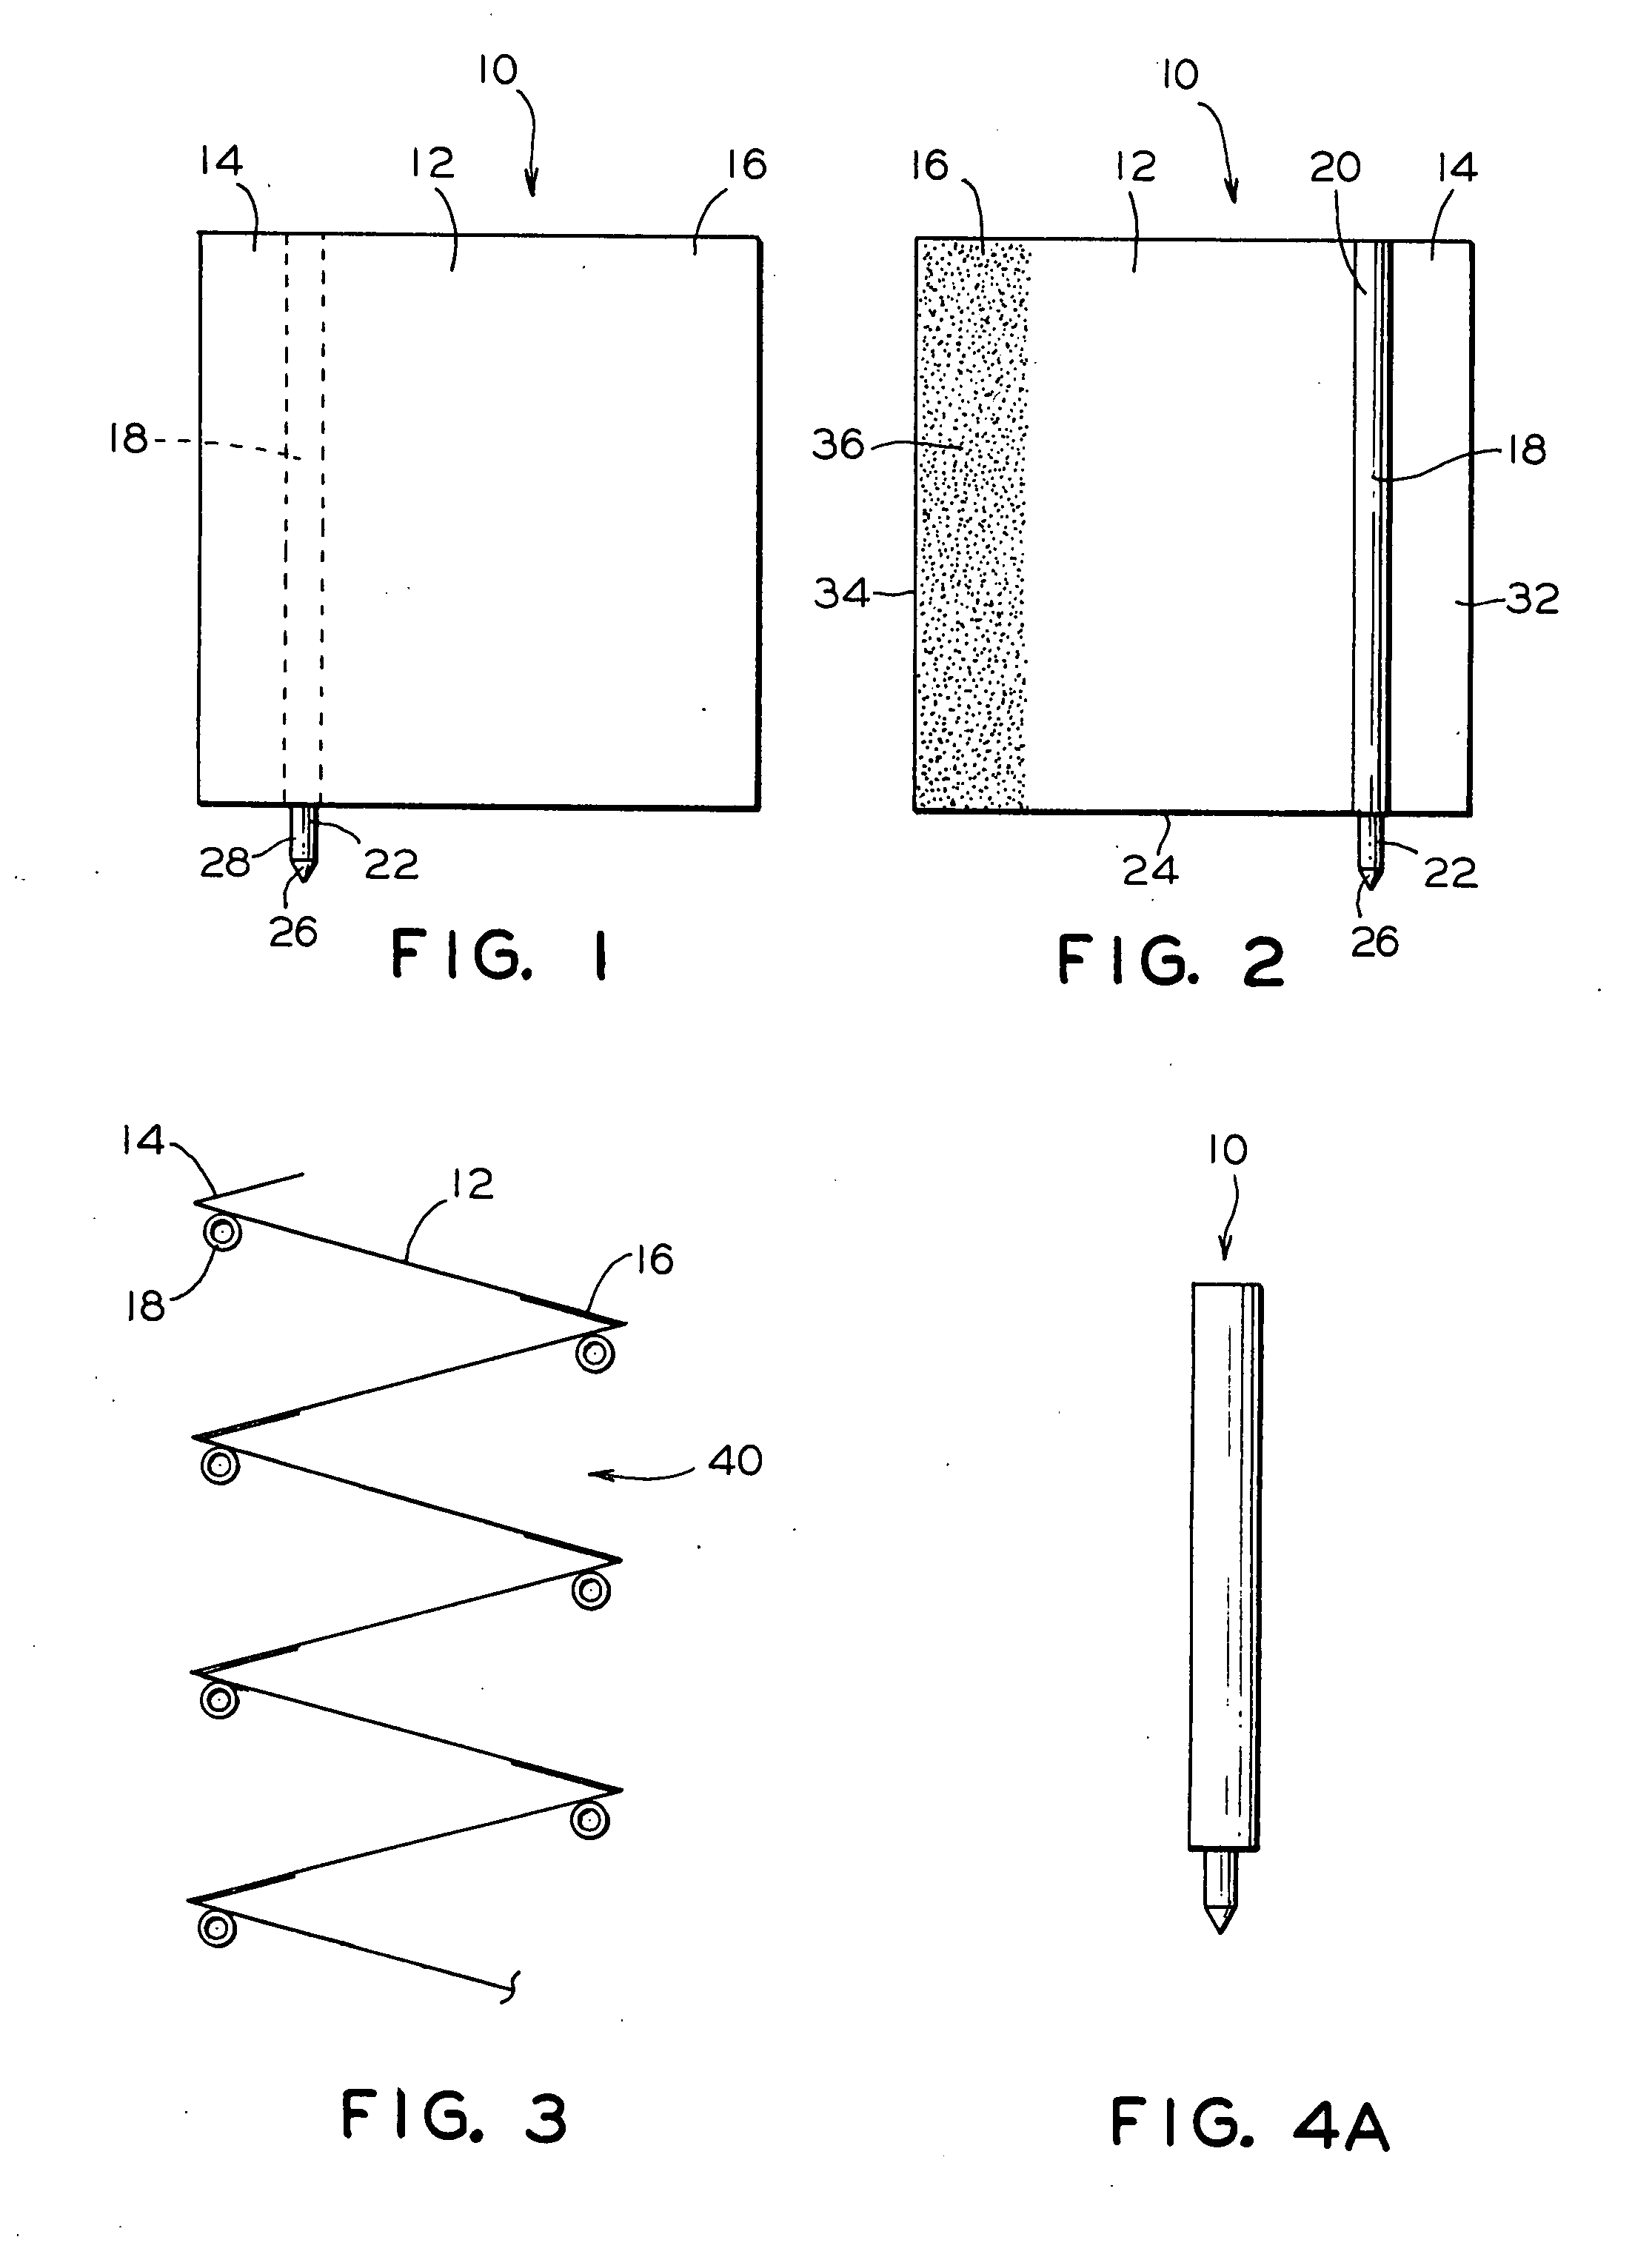 Sanitary disposable writing instrument, method of making, and dispenser therefore